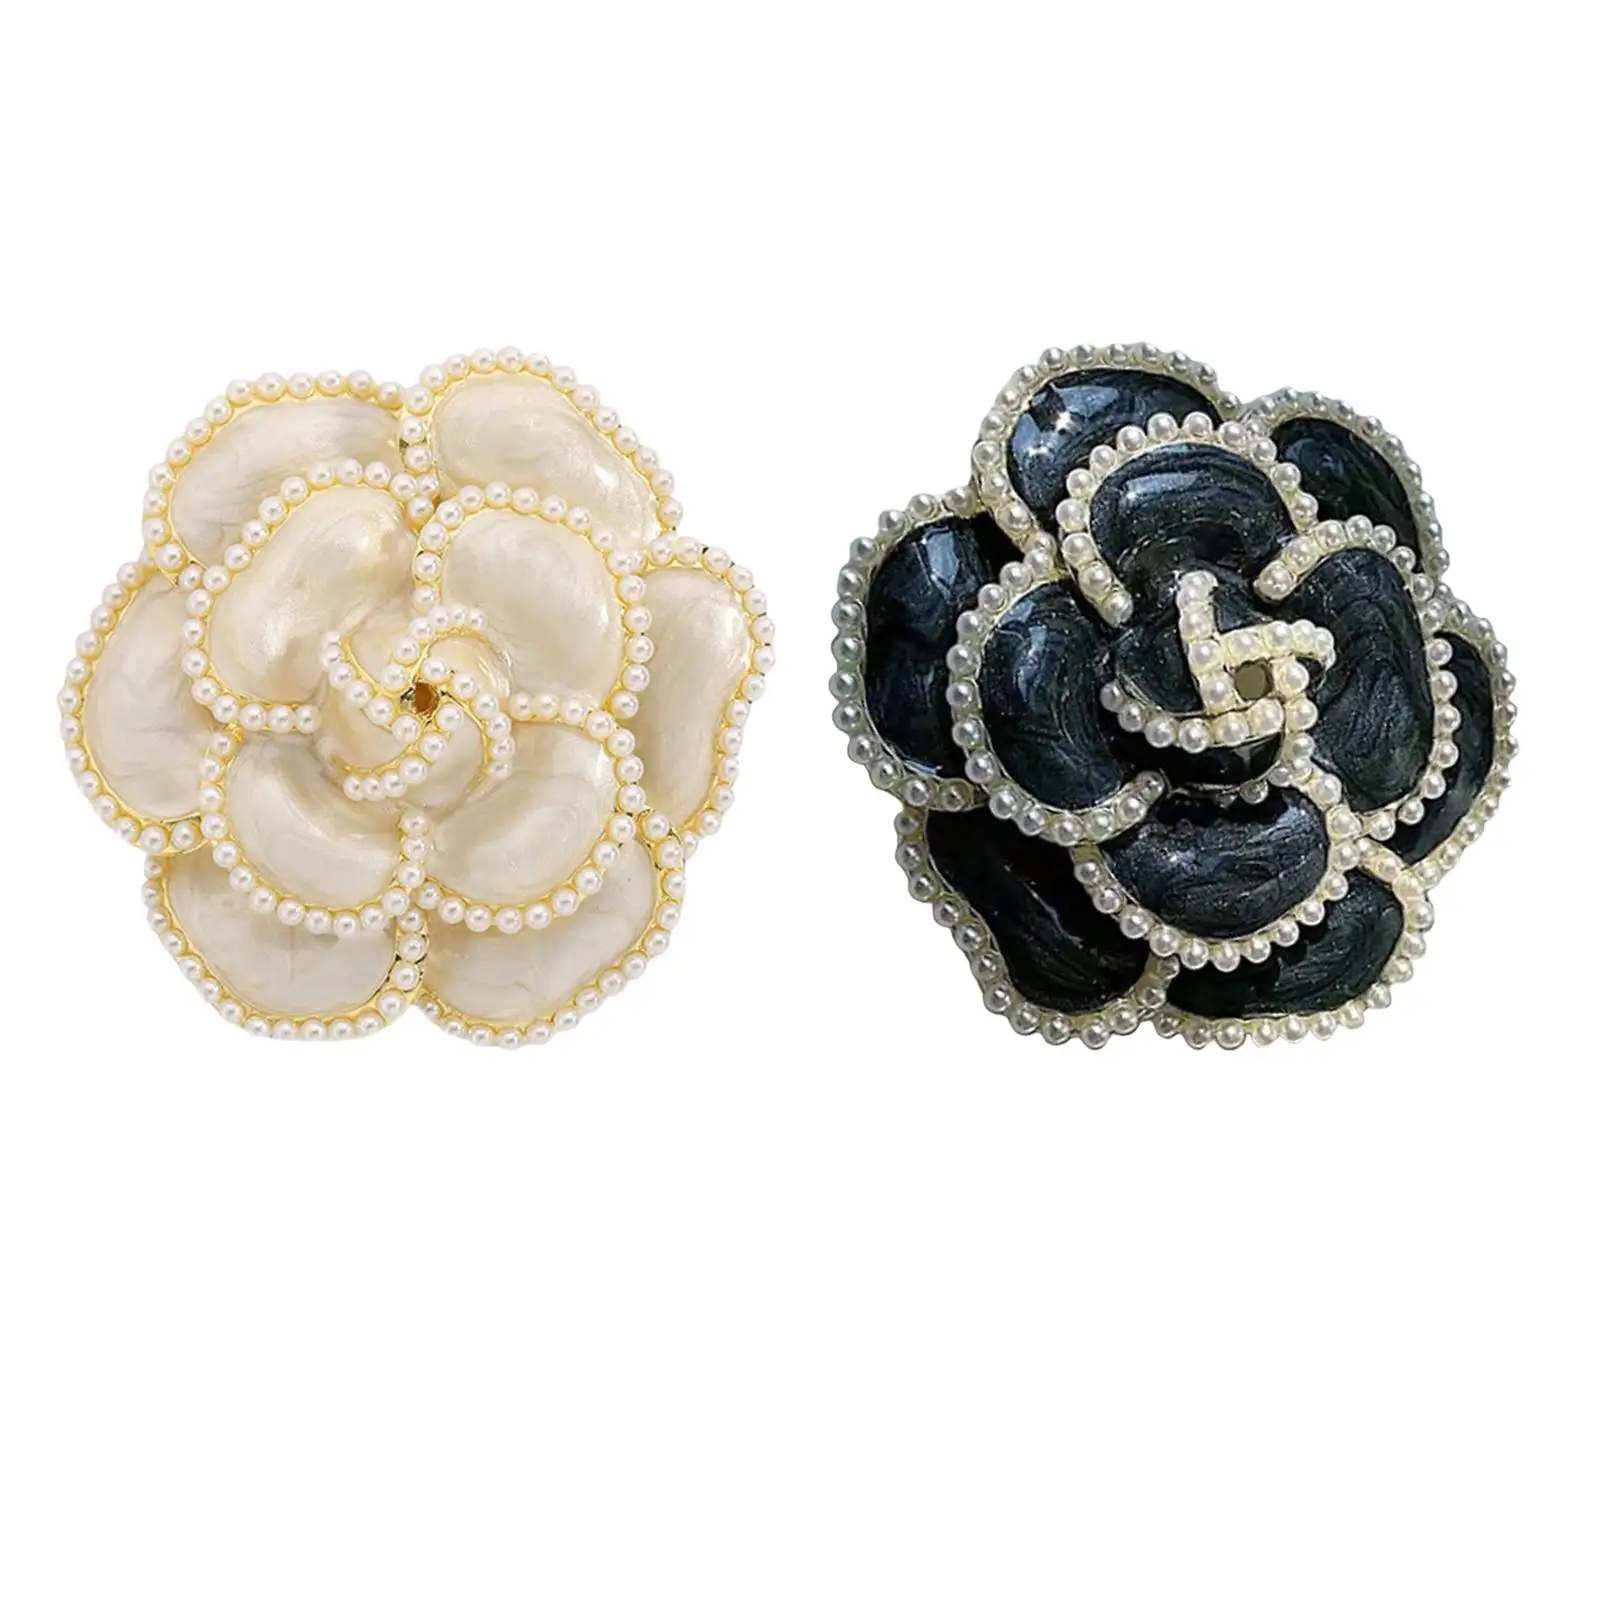 Stylish Brooch Clothing Accessories Decor Costume Gift Jewelry Badge Exquisite Floral Lapel Pin for Prom Banquet Dress Skirt Bag